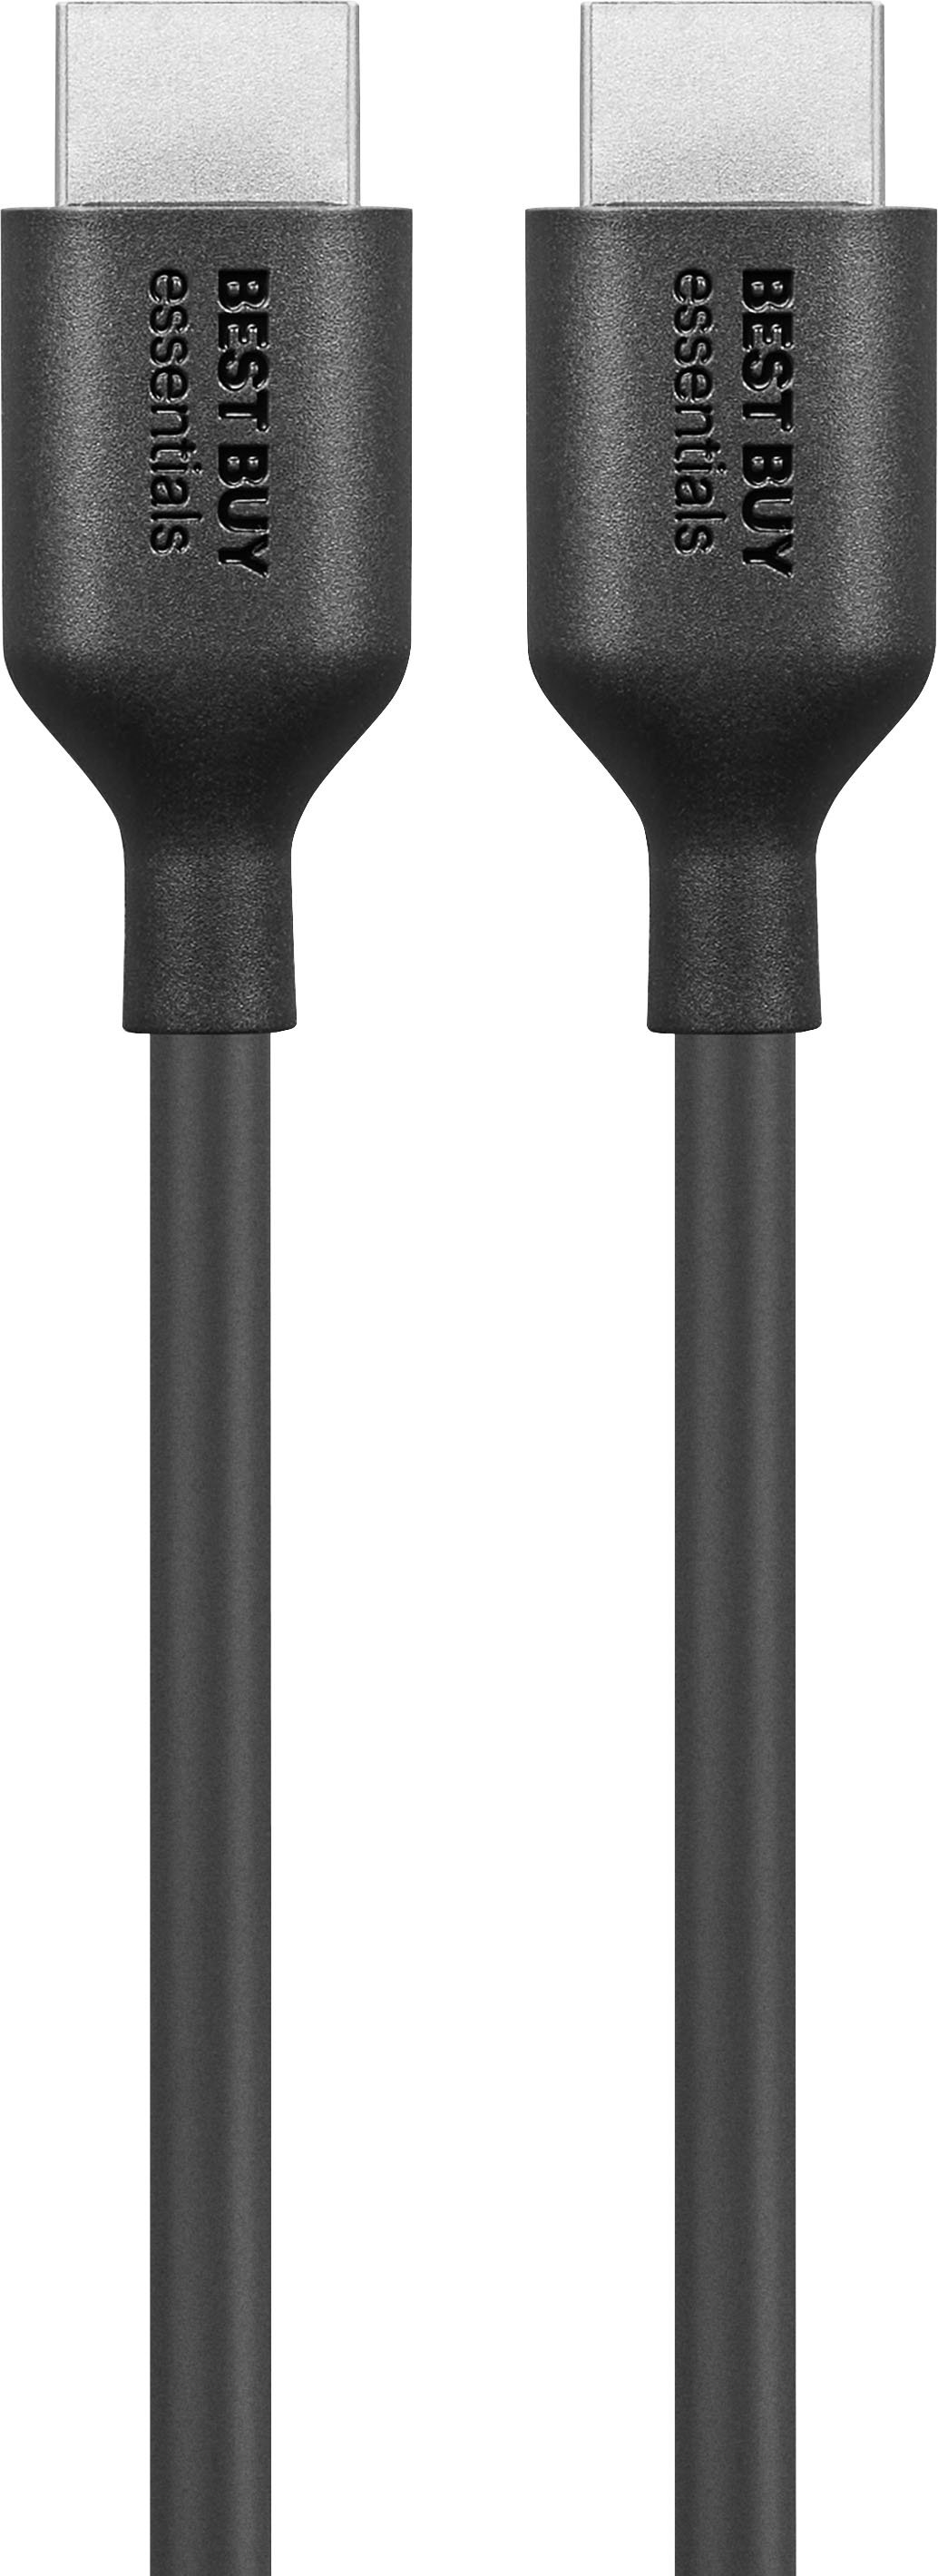 Left View: Best Buy essentials™ - 6' 4K Ultra HD HDMI Cable - Black